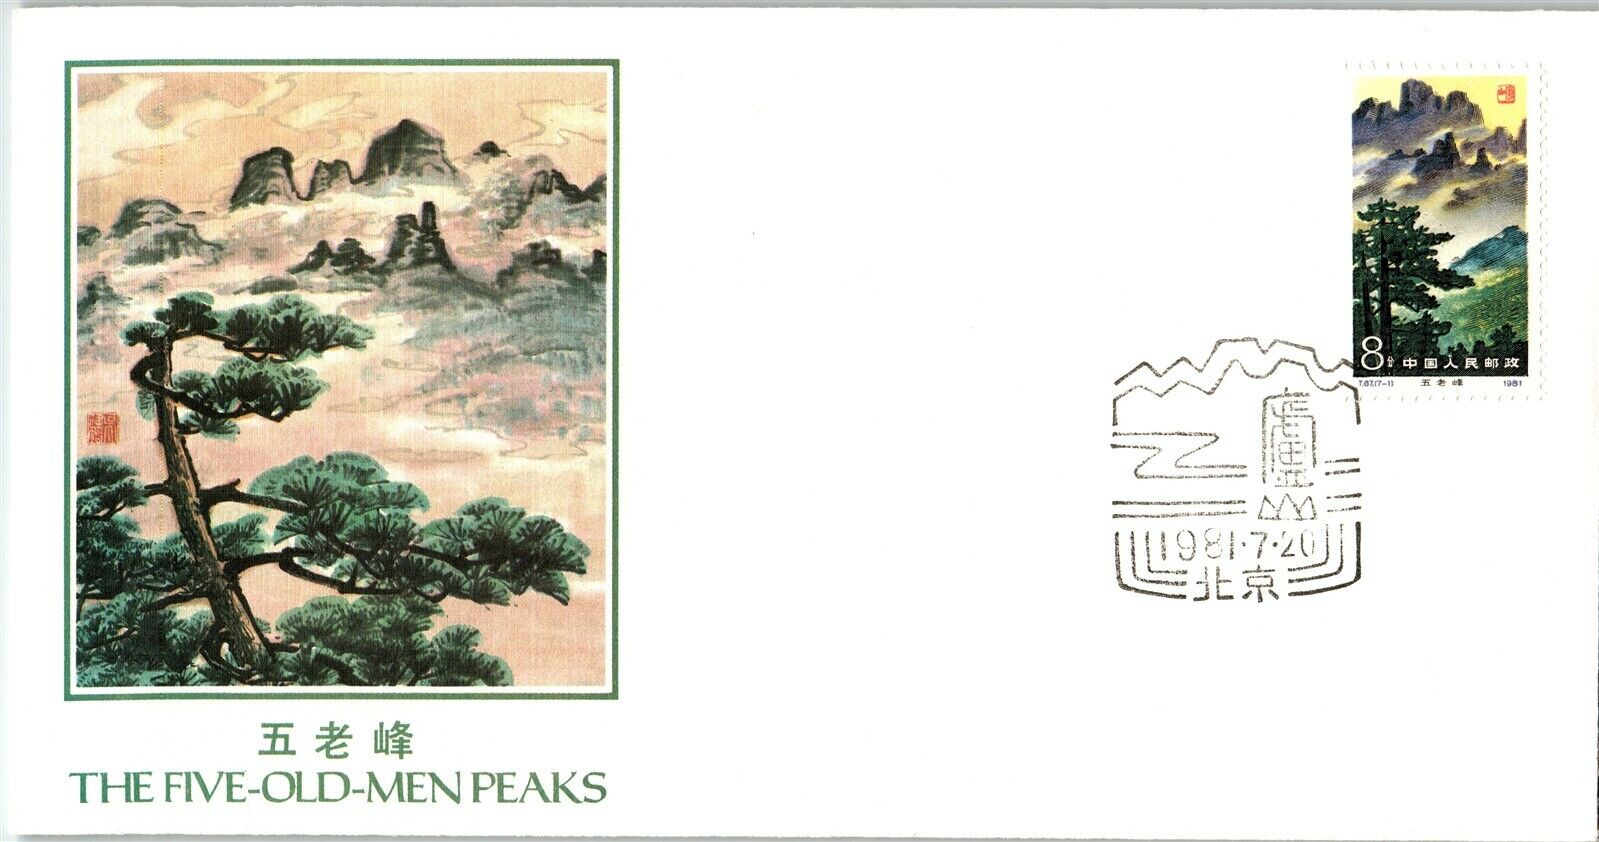 CHINA PRC FDC Selections: Scott #1696 8f LUSHAN Mountains Issue